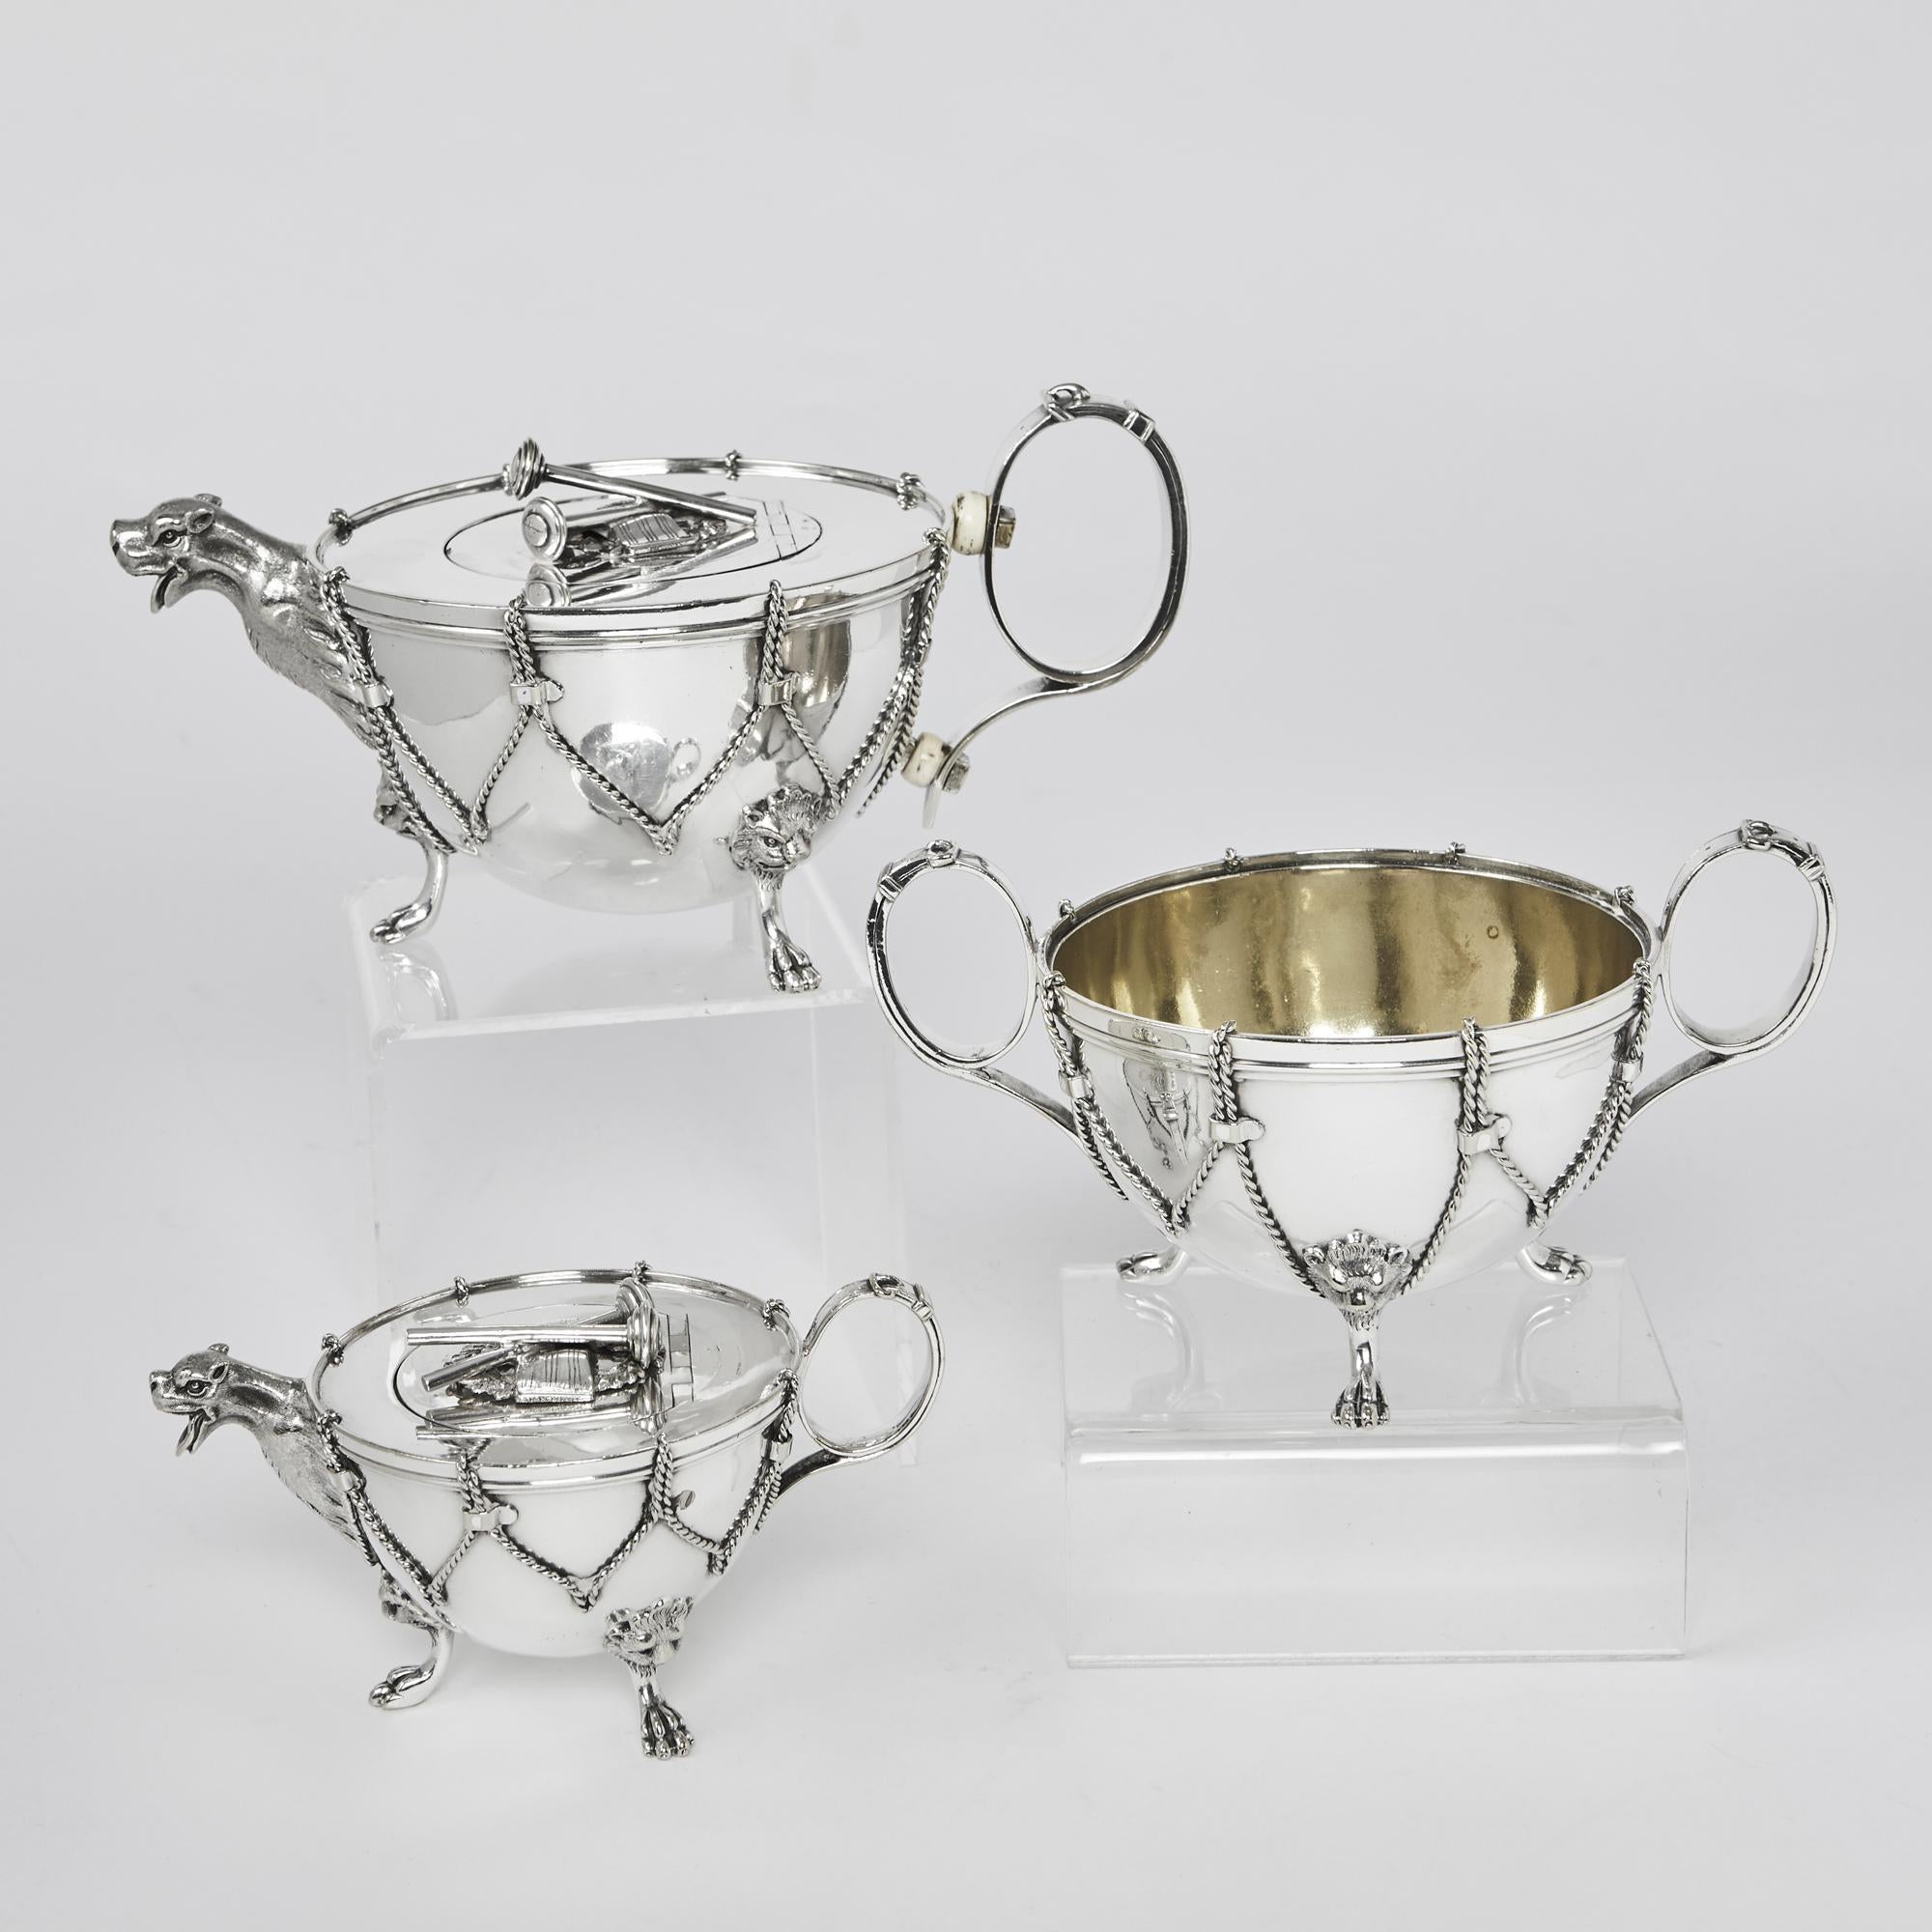 Exceptional and rare, possibly unique, three-piece, silver-plated tea set, comprising a teapot, milk jug and sugar bowl, all authentically modelled as military kettle drums with applied rope-effect mouldings.

Each piece of this silver-plated tea